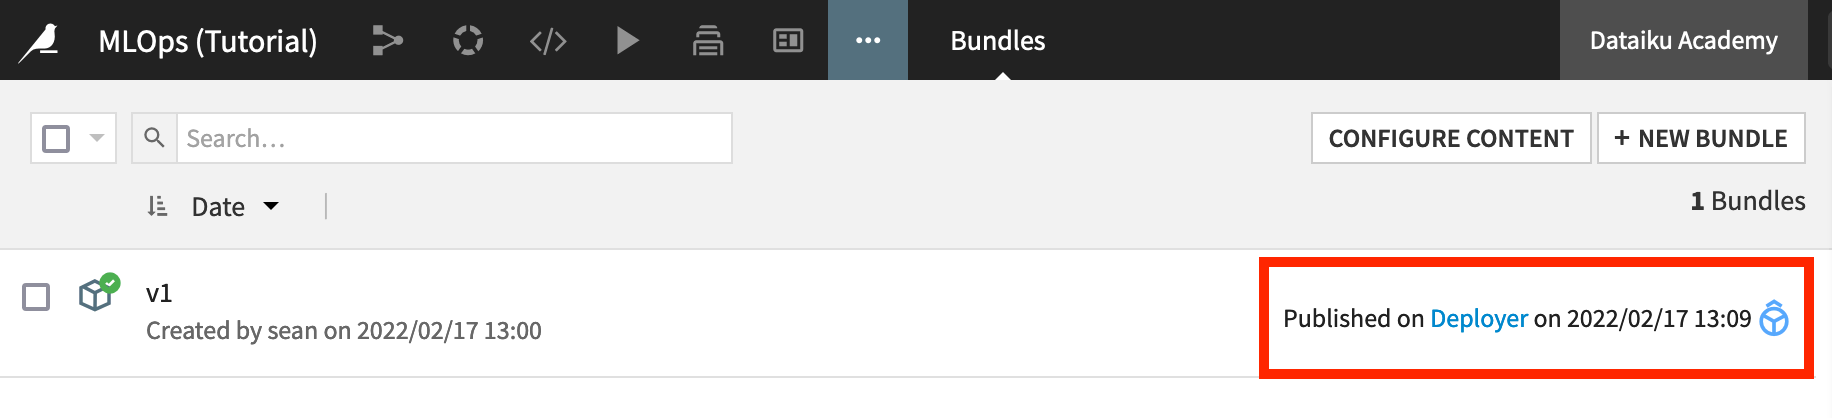 Dataiku screenshot of the bundles page showing a bundle published to the Deployer.